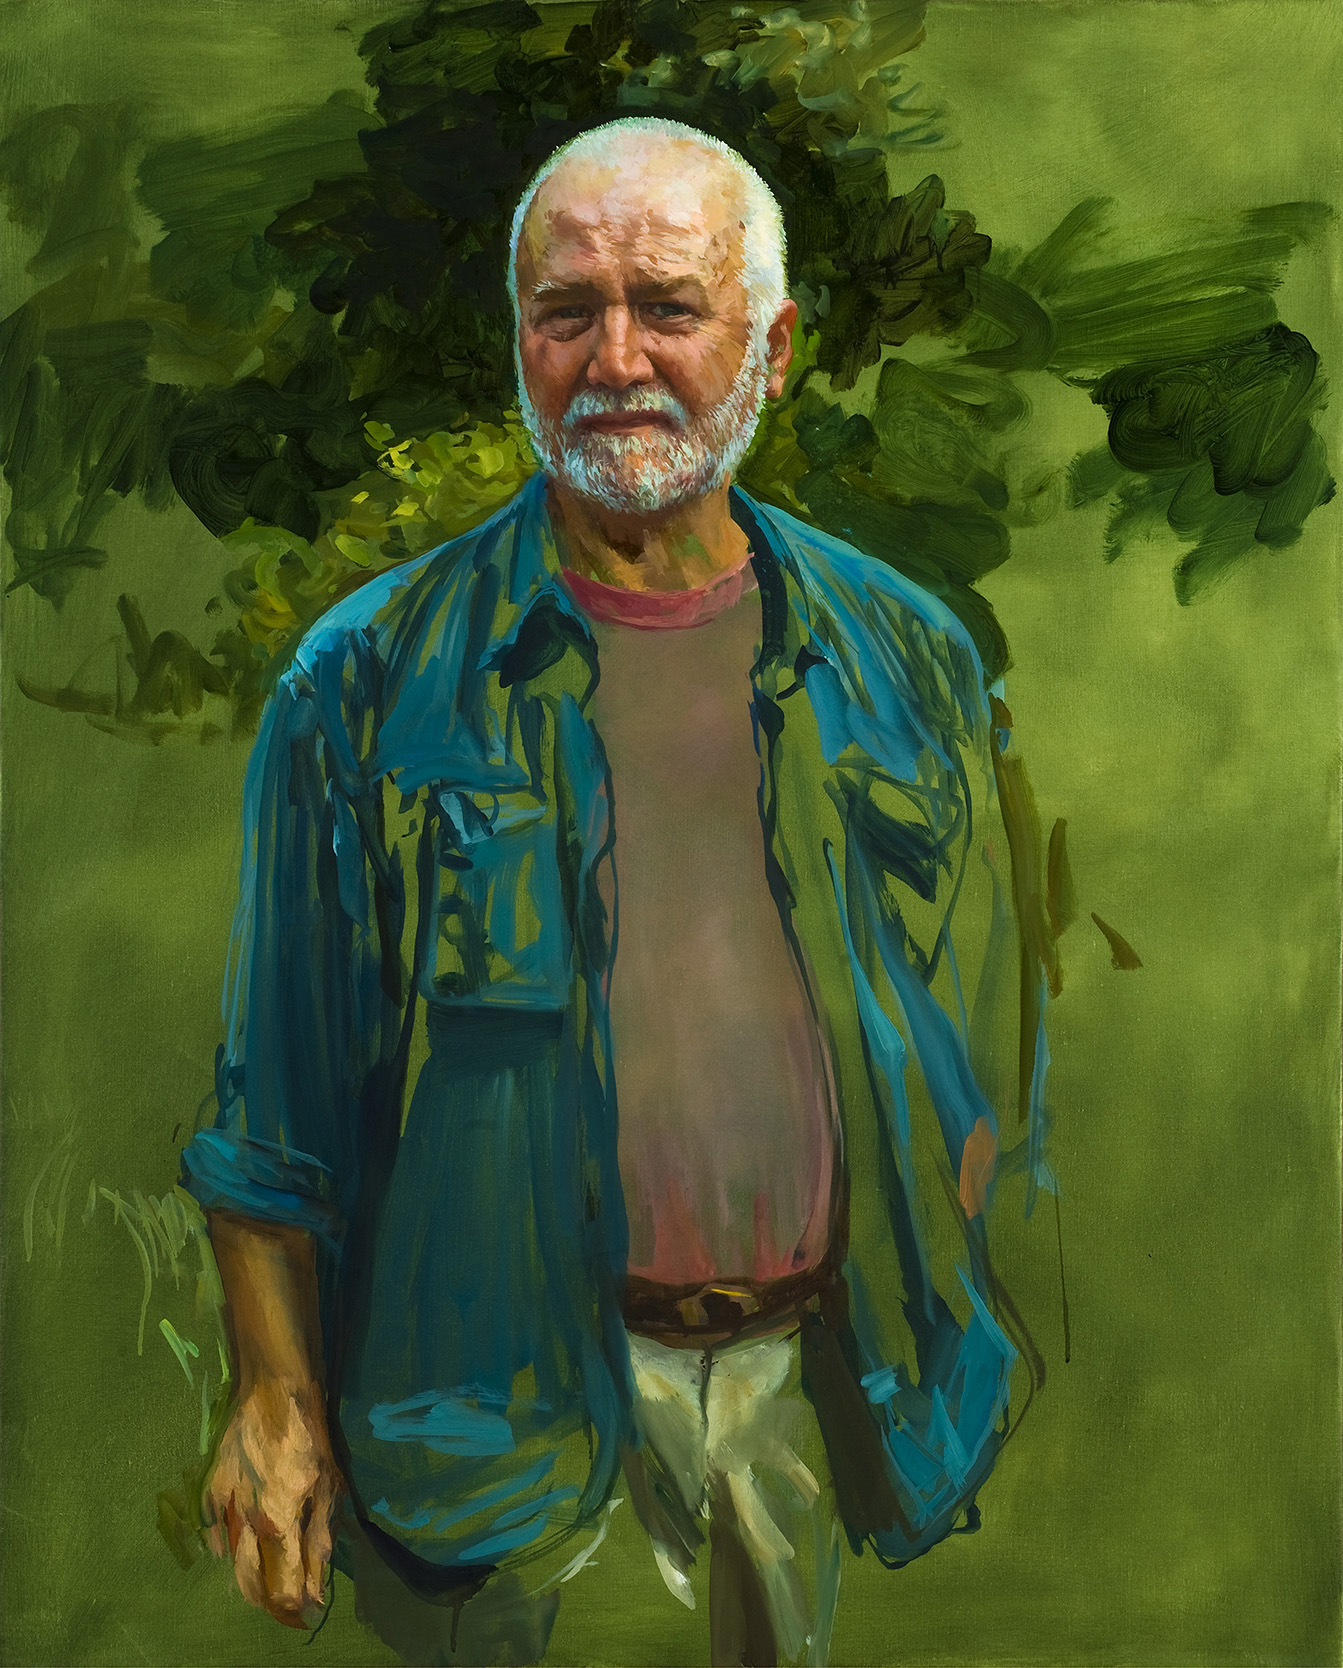  Russell's Doppelganger; oil on canvas, 40 x 32 inches, 2008 